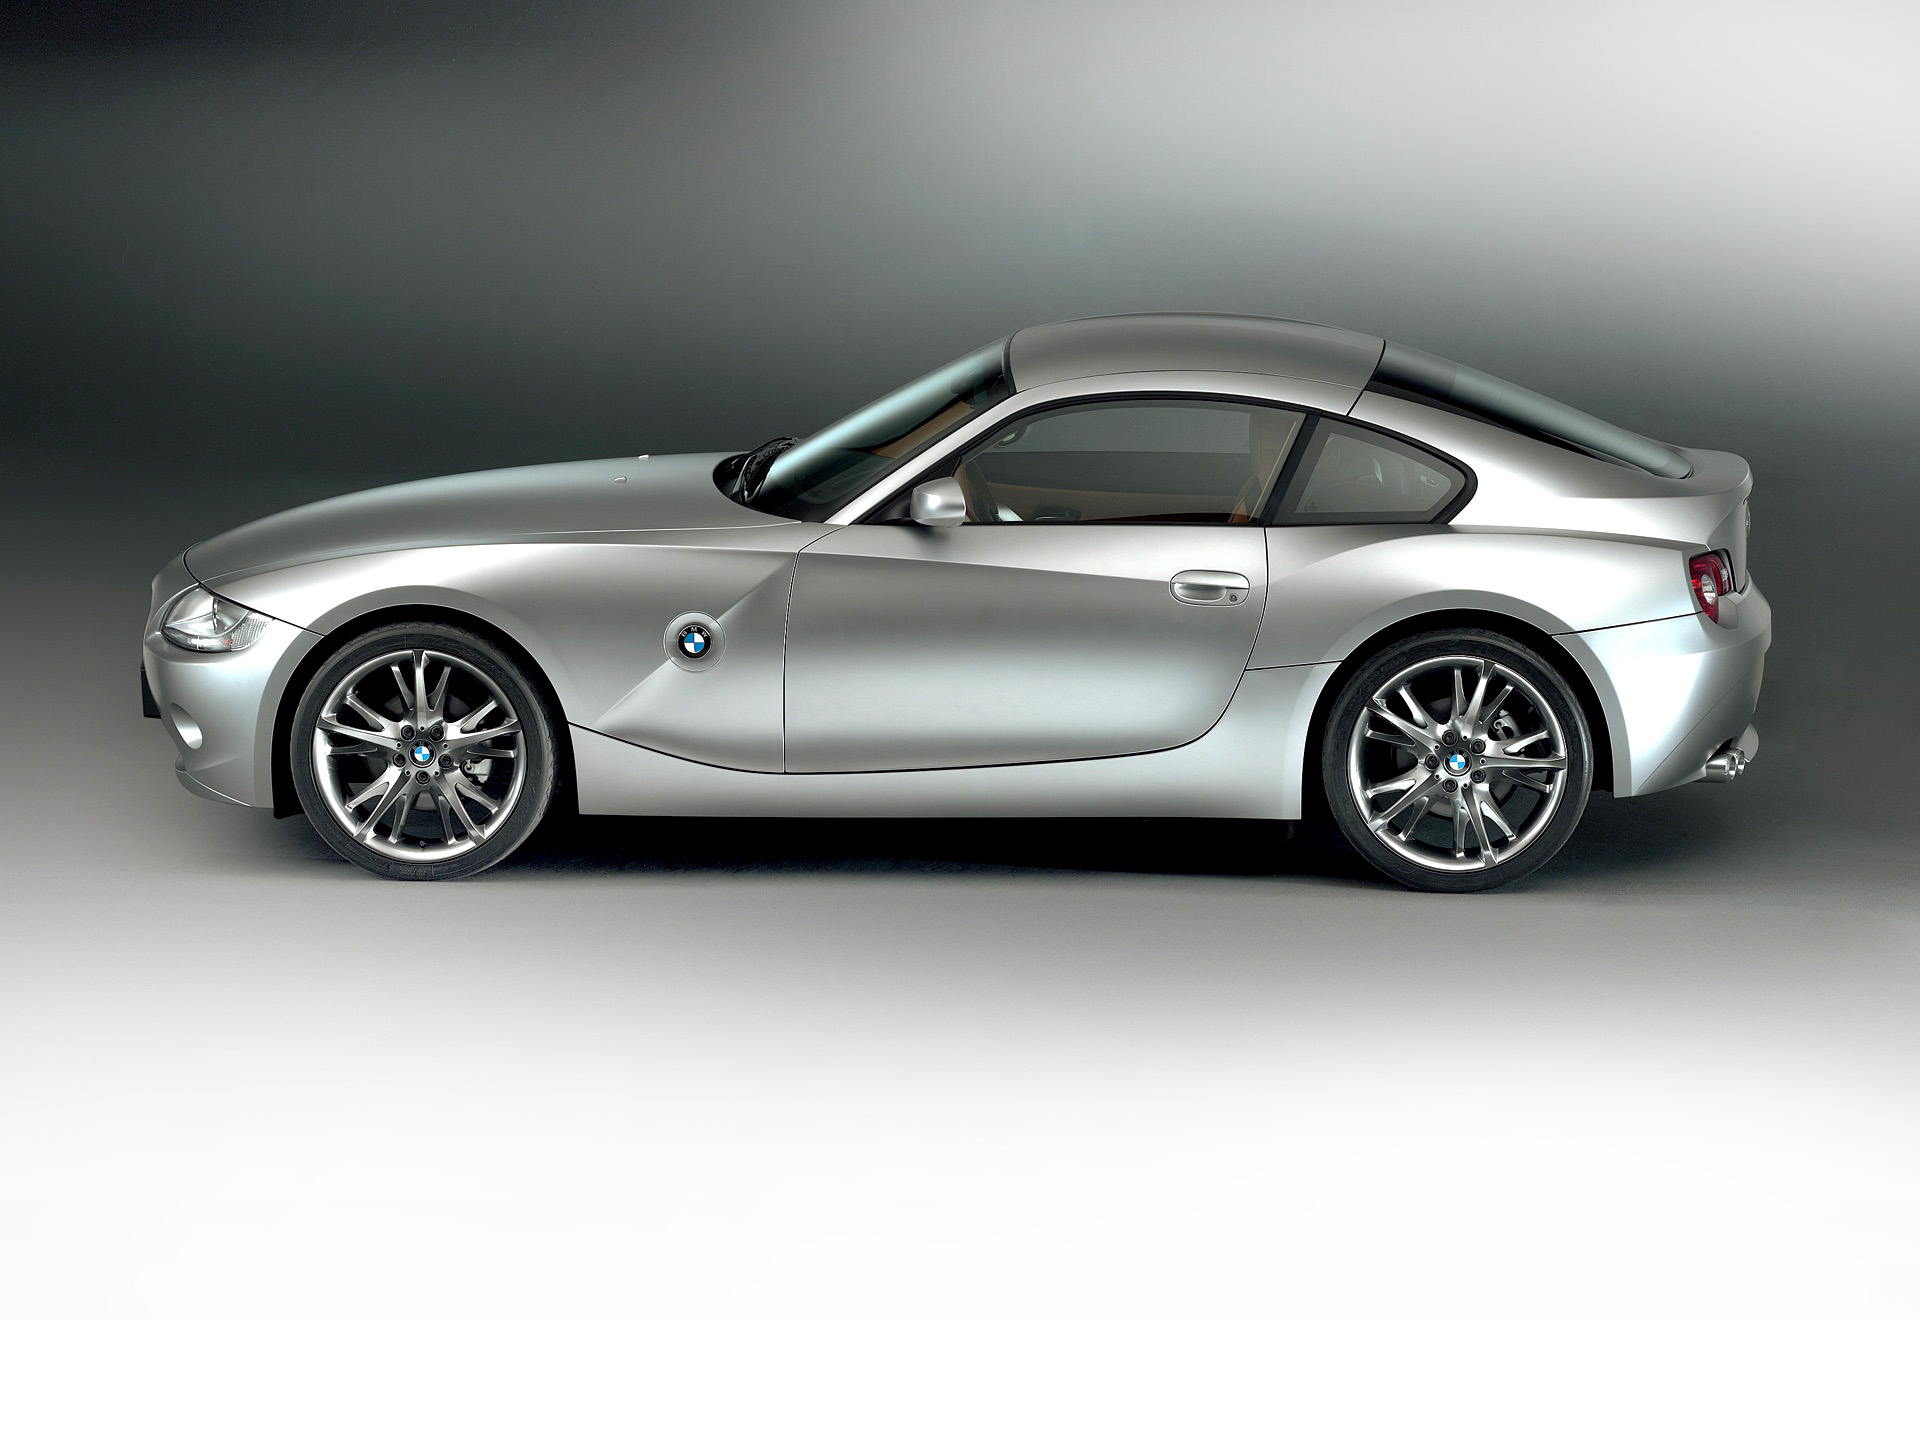 Bmw Concept Z4 Coupe Wallpapers